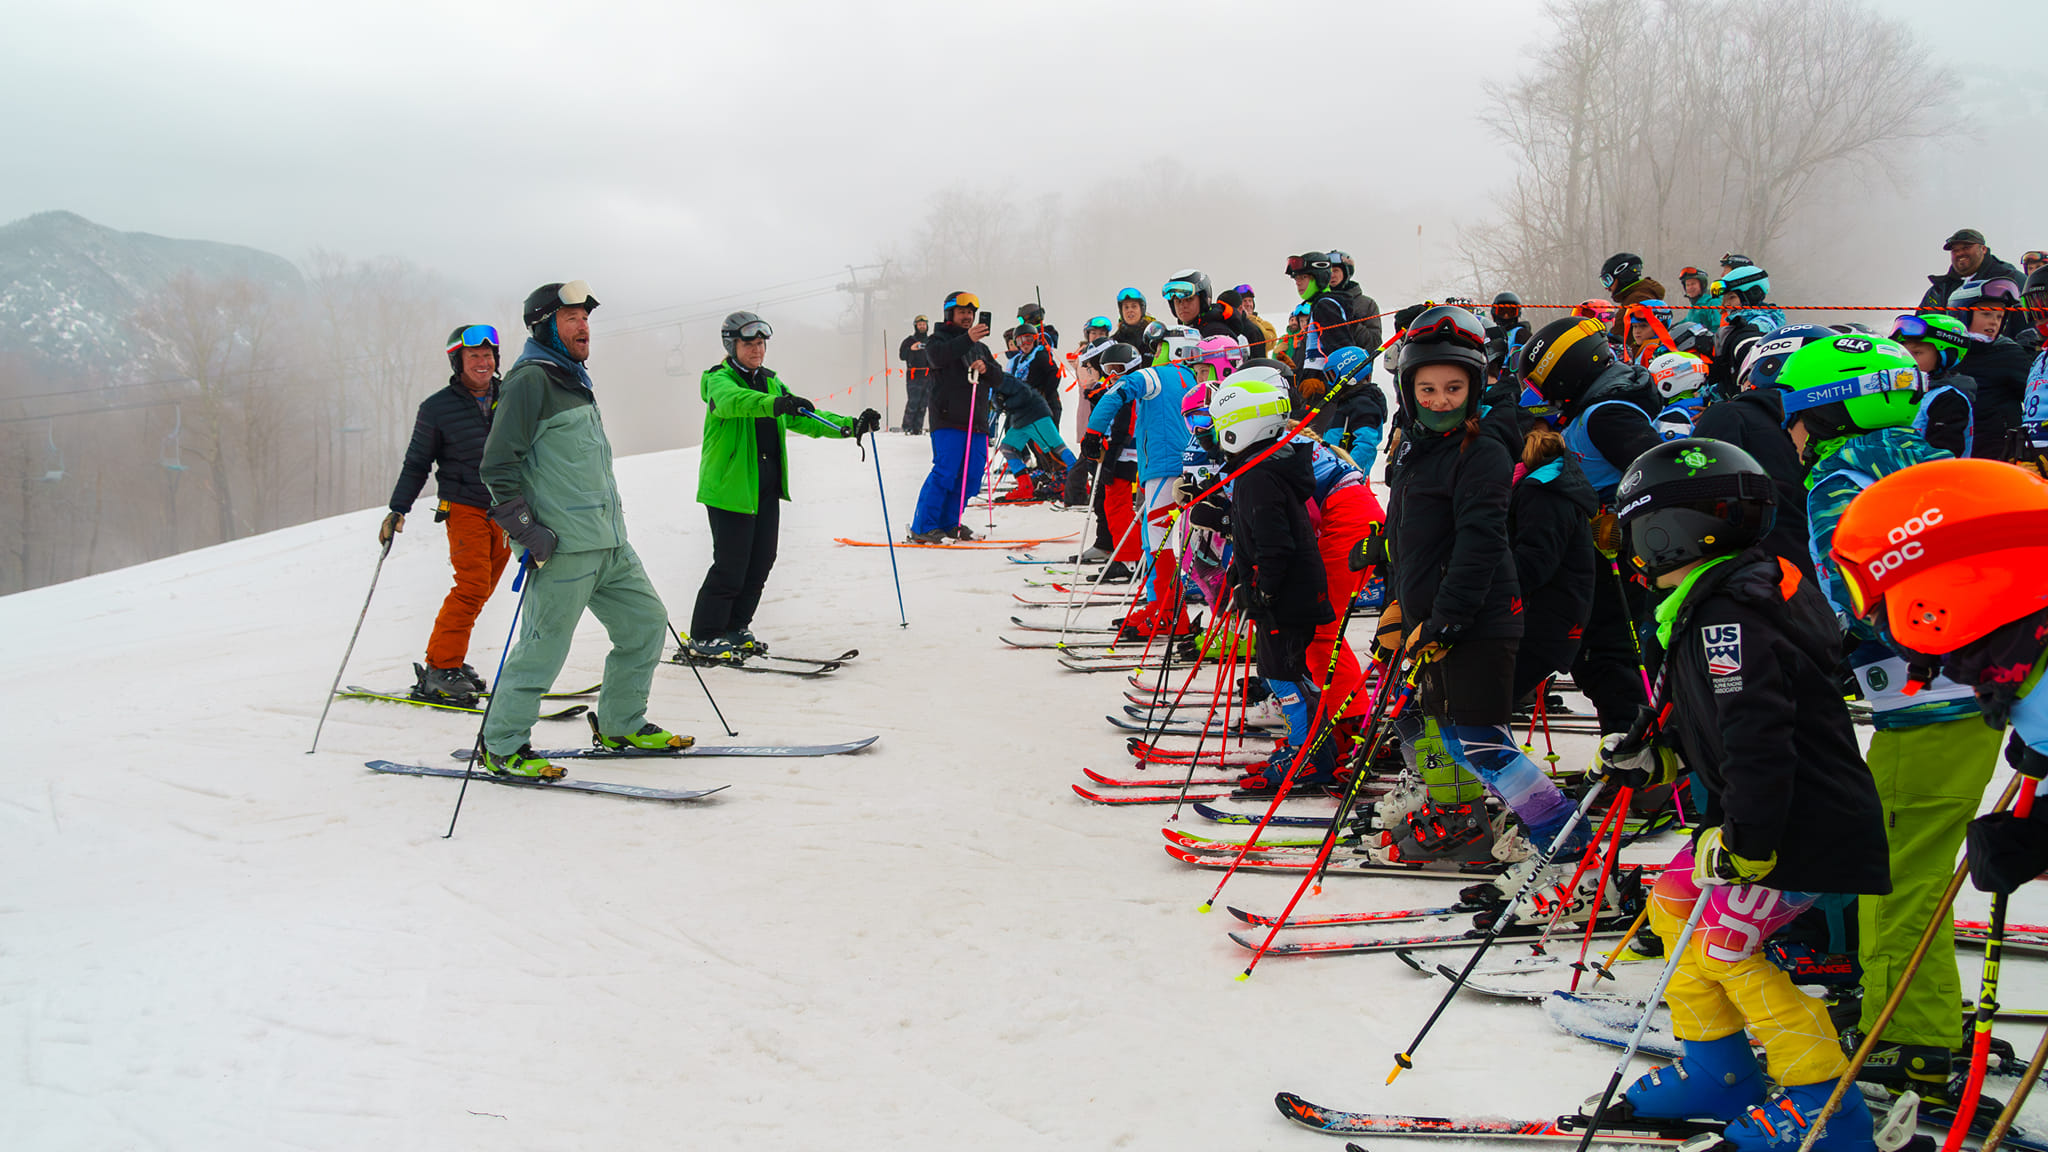 Bode Miller at the starting line with kids lined up to ski with him at bode fest 2024